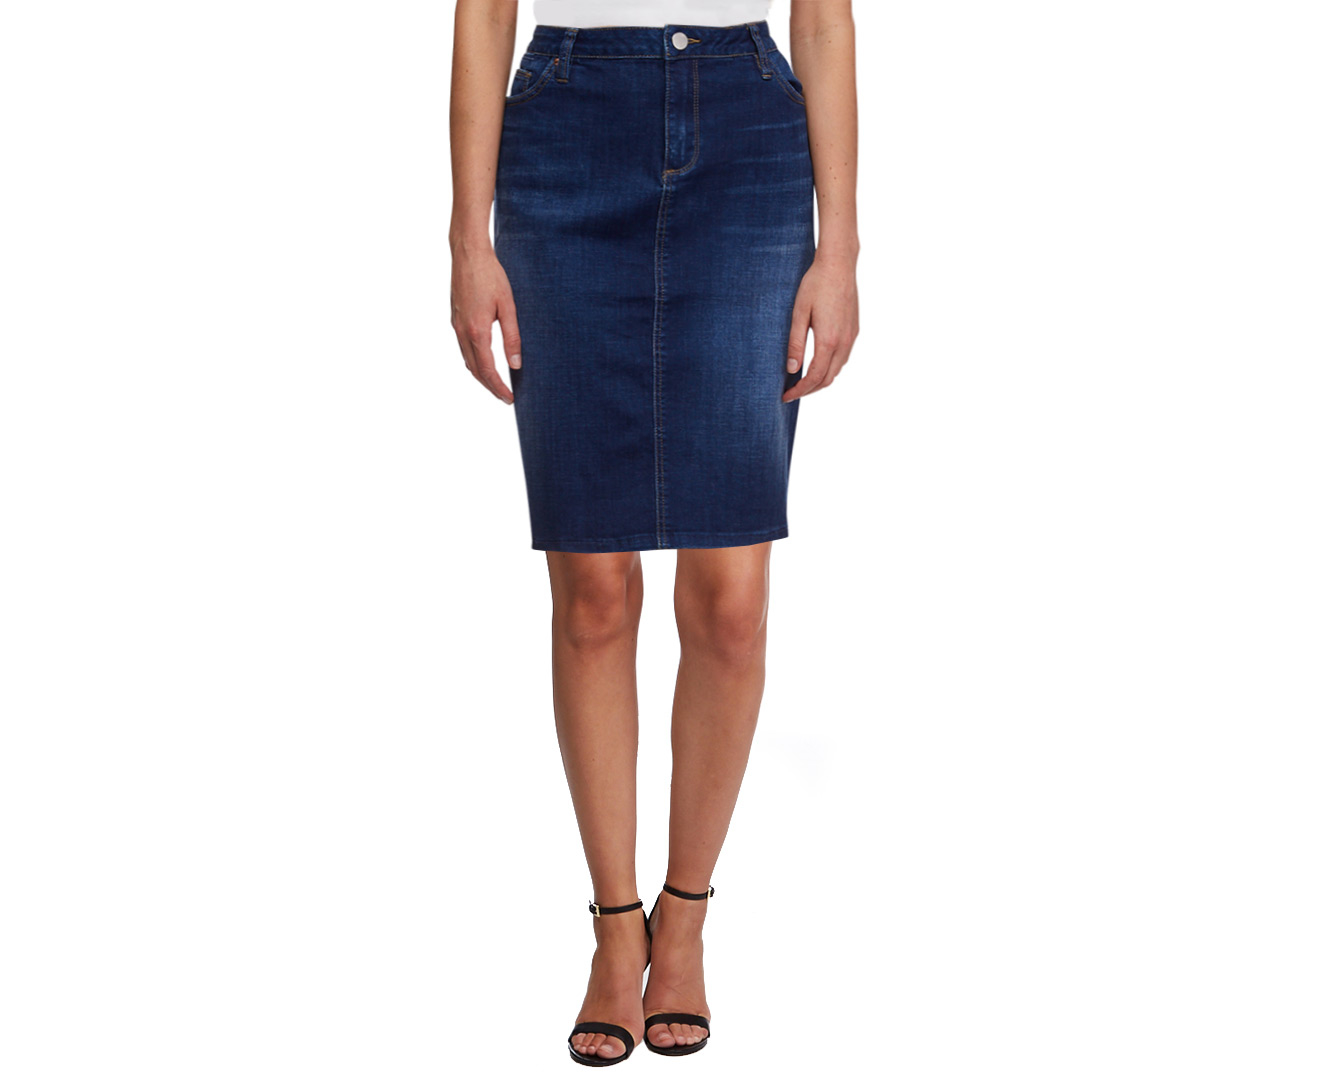 Jeanswest Women's Giana Curve Embracer Authentic Denim Skirt - Bright ...